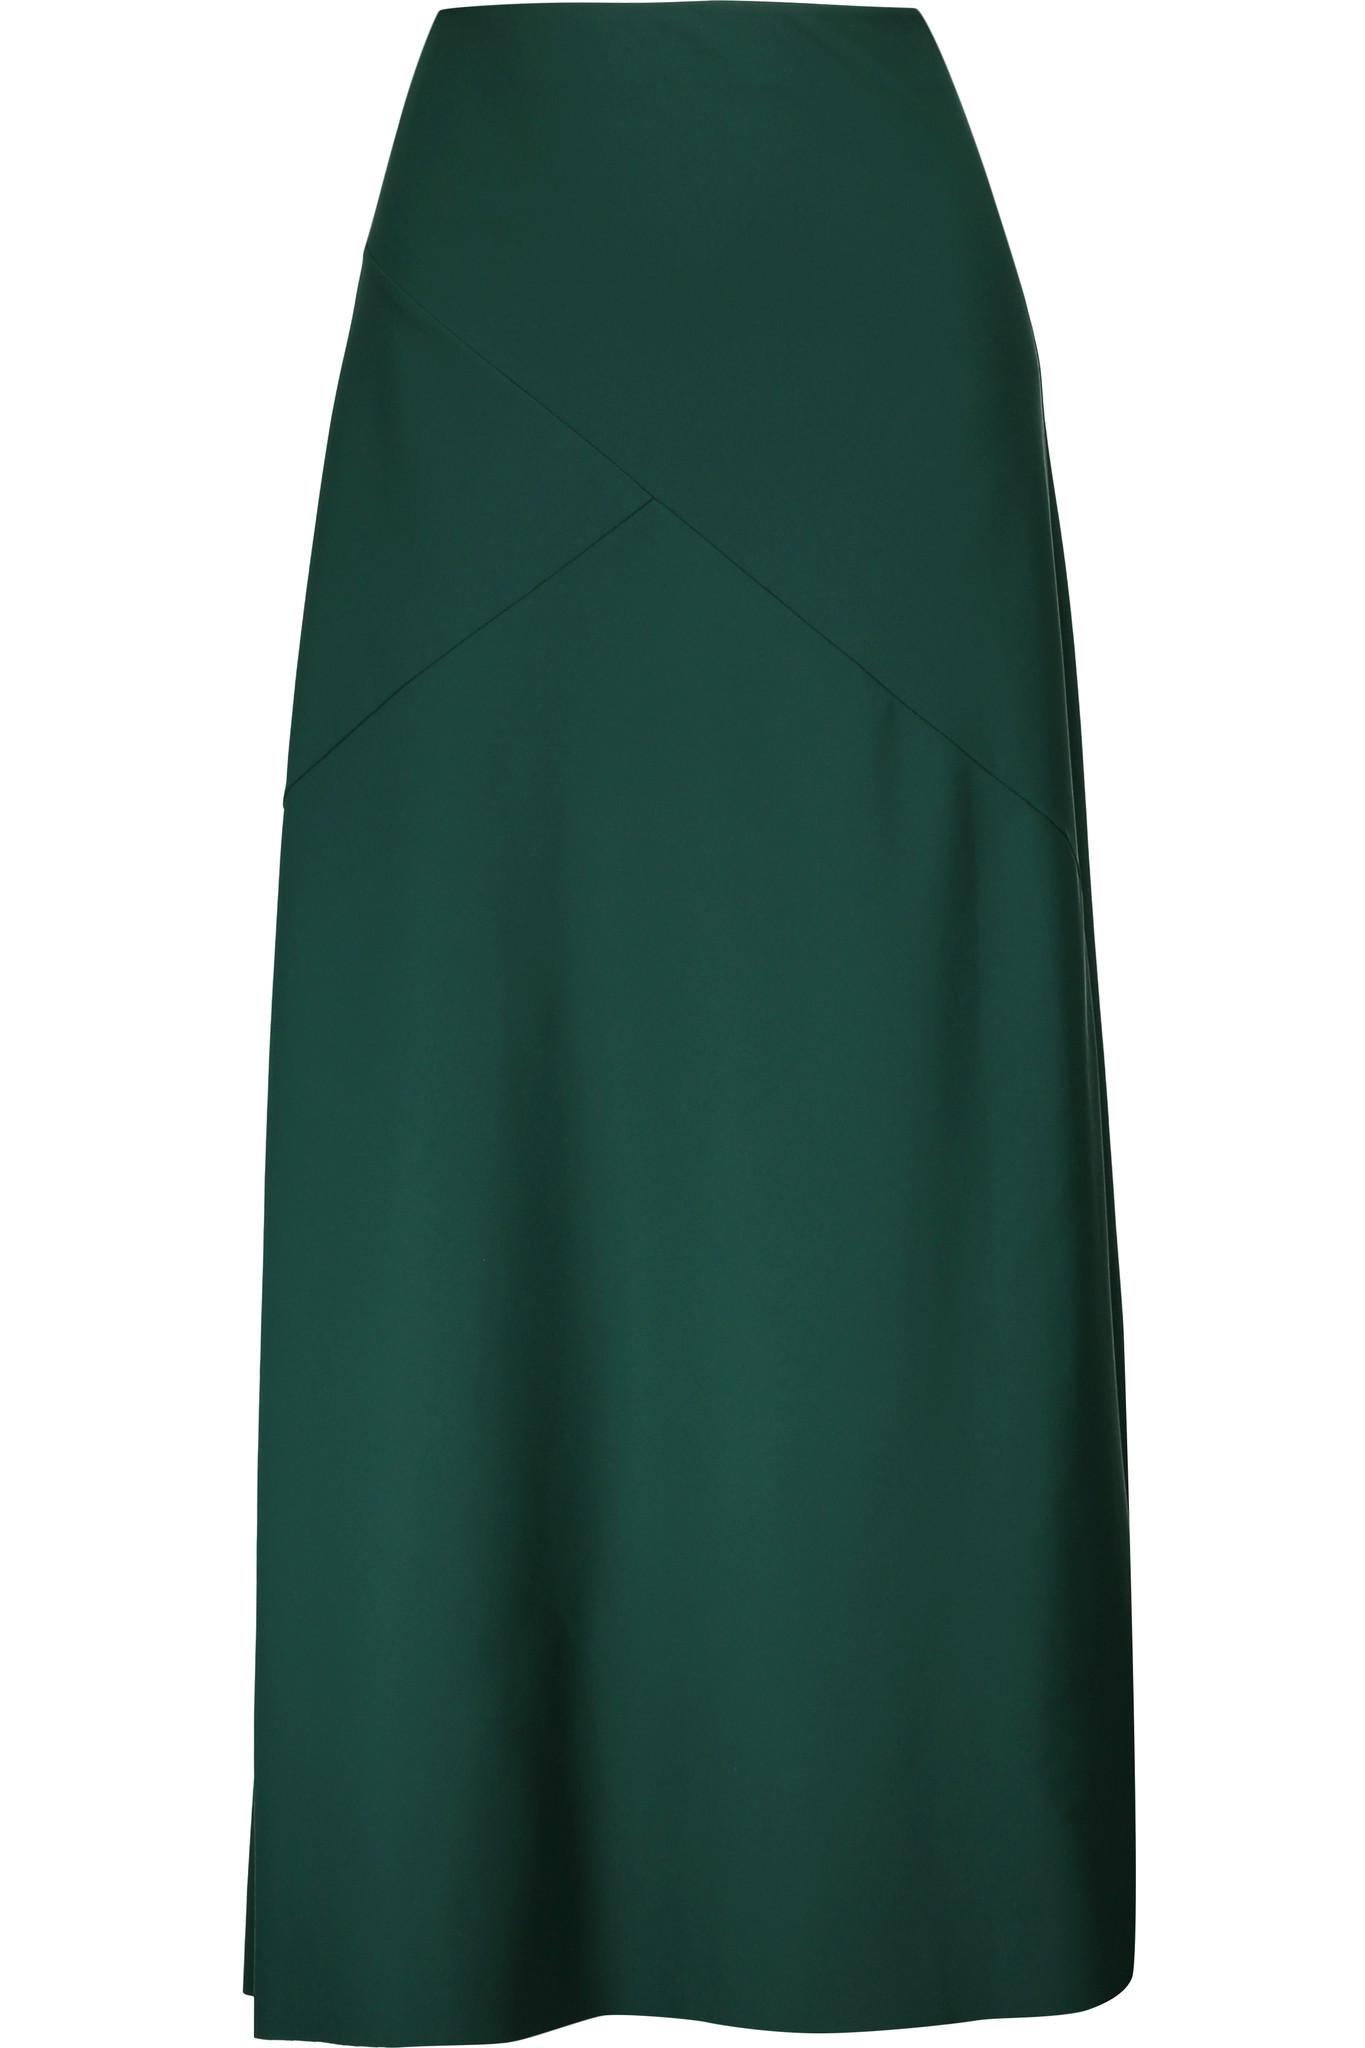 Theory Synthetic Vutera Stretch-knit Maxi Skirt in Emerald (Green) - Lyst